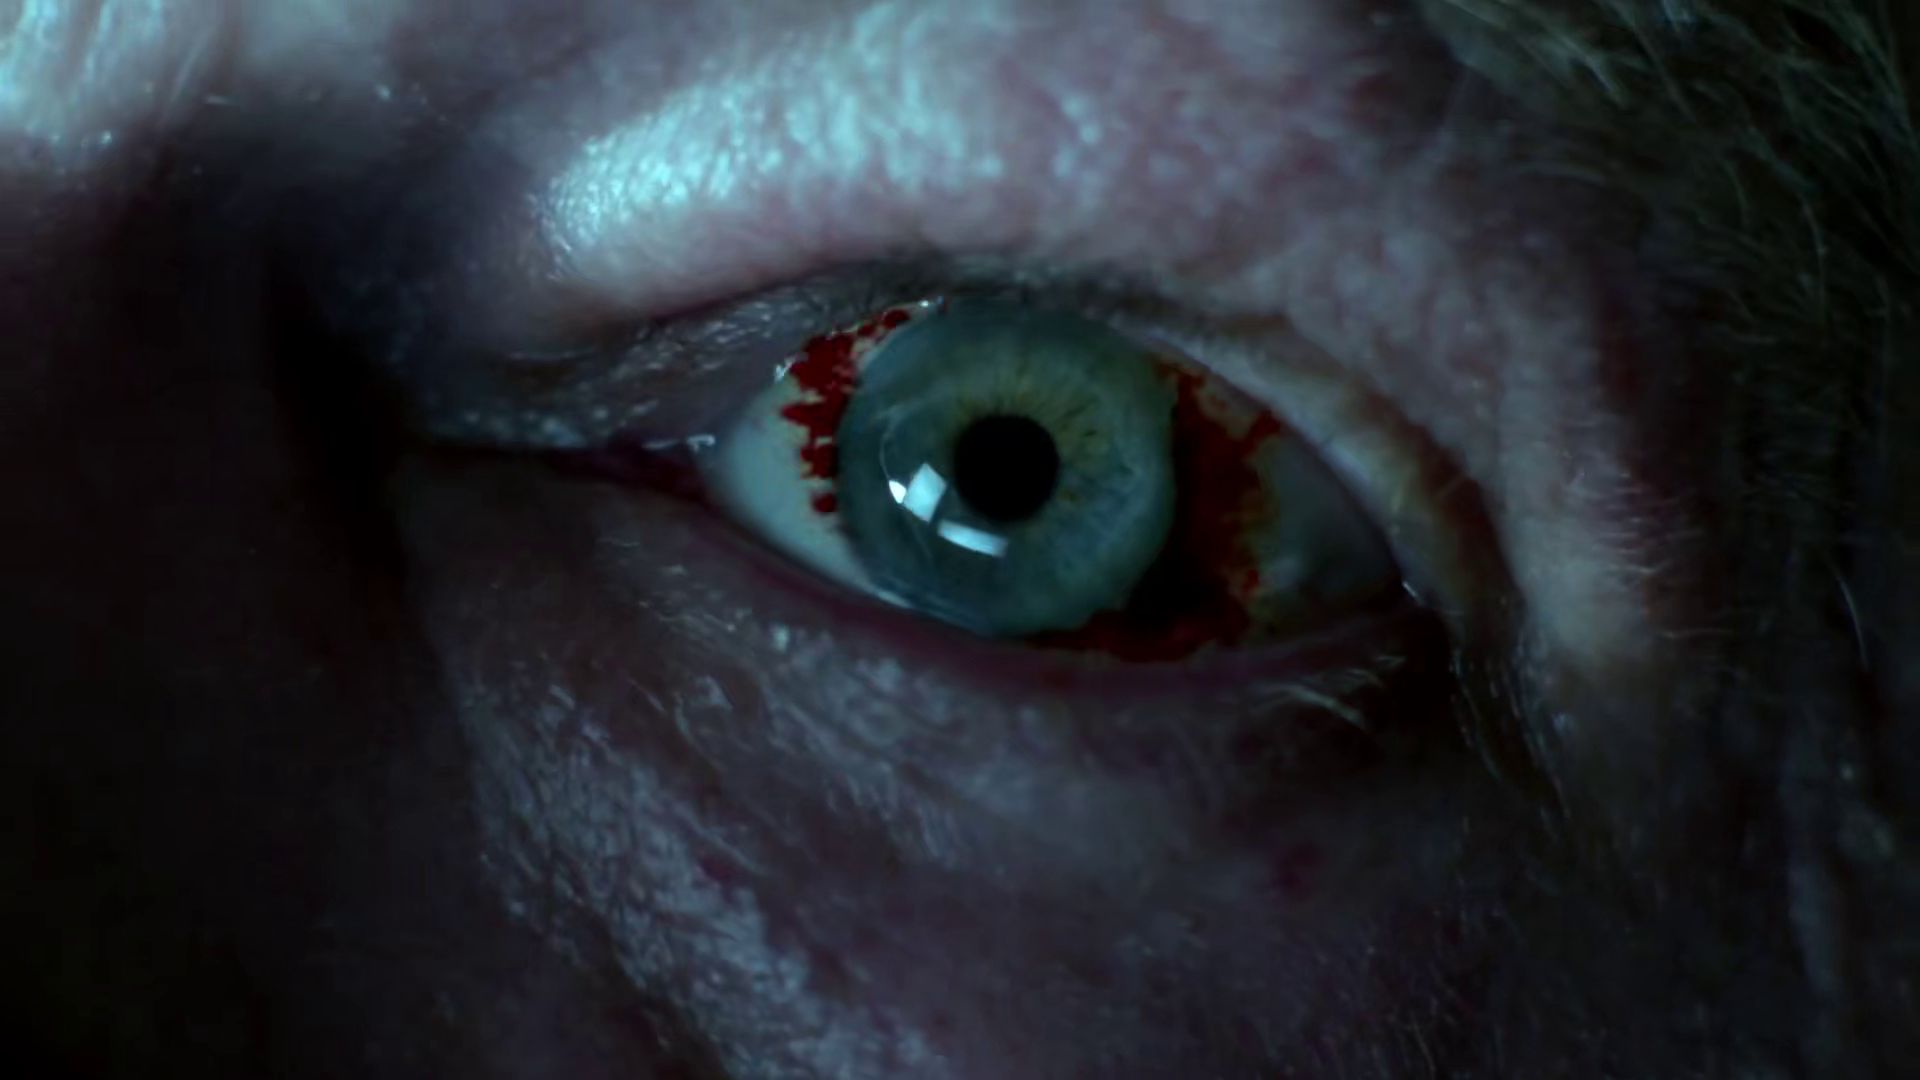 Connection: Blood vessels in Walter's eye